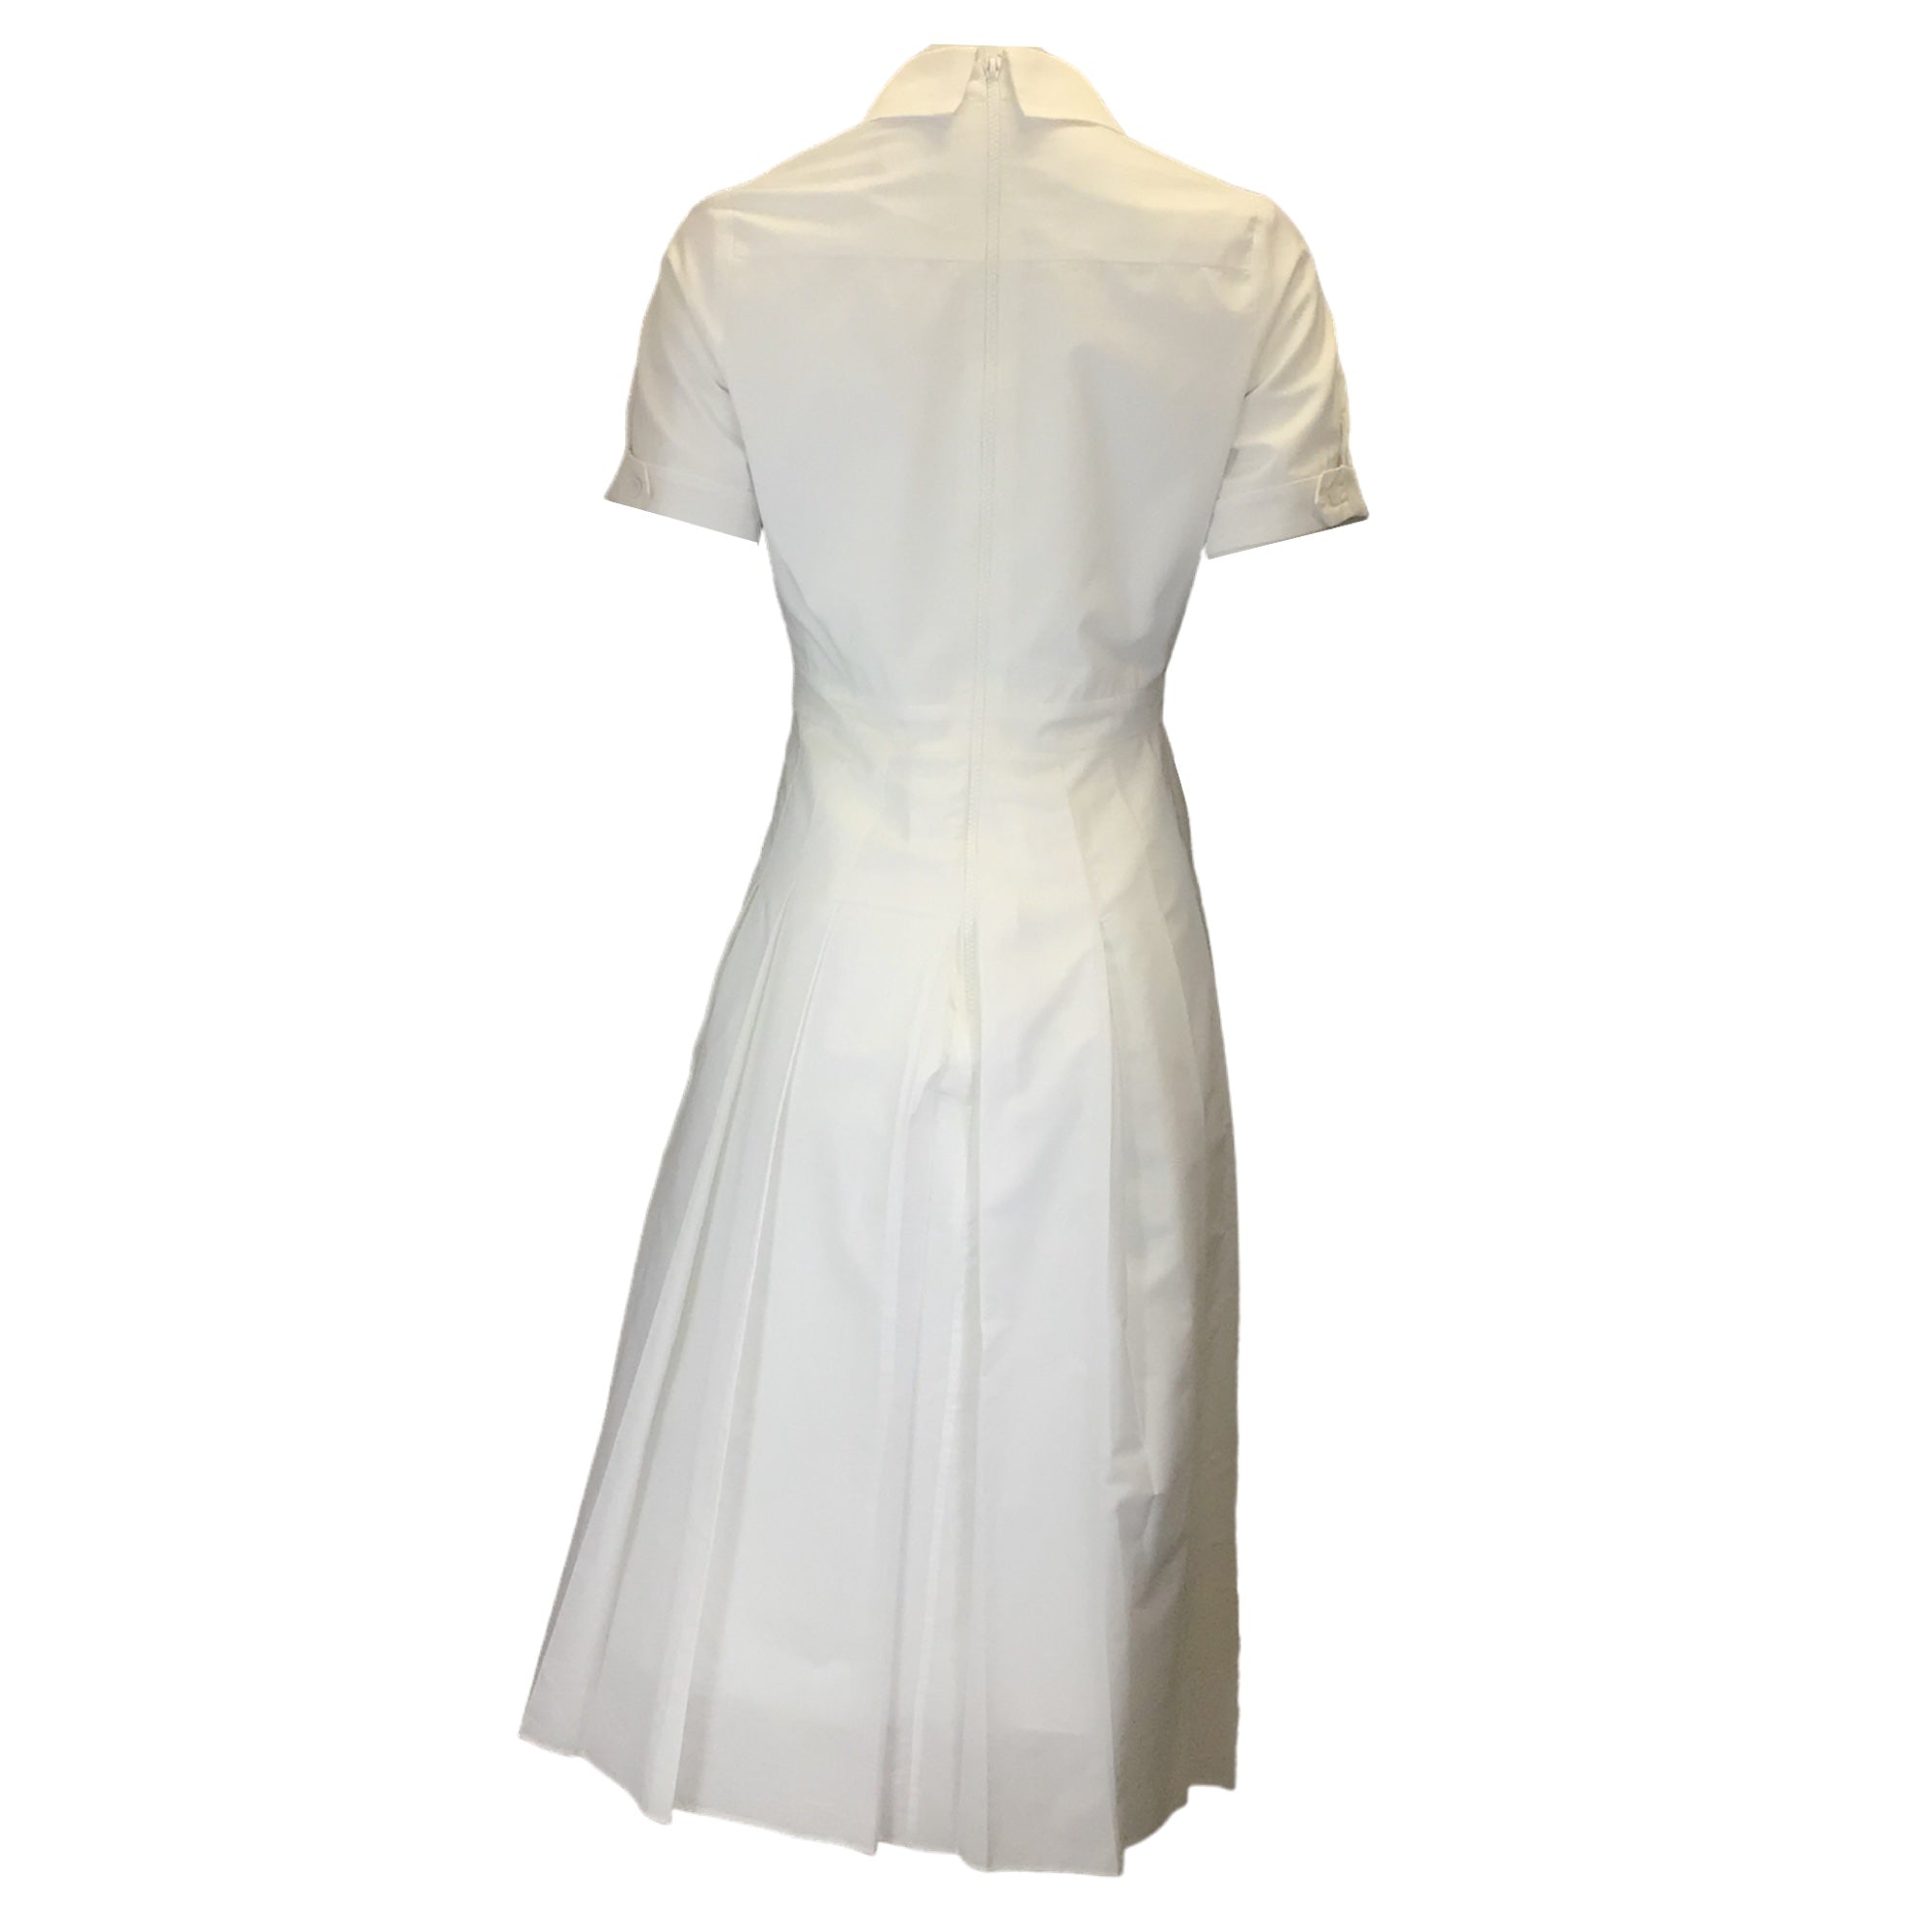 Duncan White Pleated Short Sleeved Button-down Cotton Shirt Dress